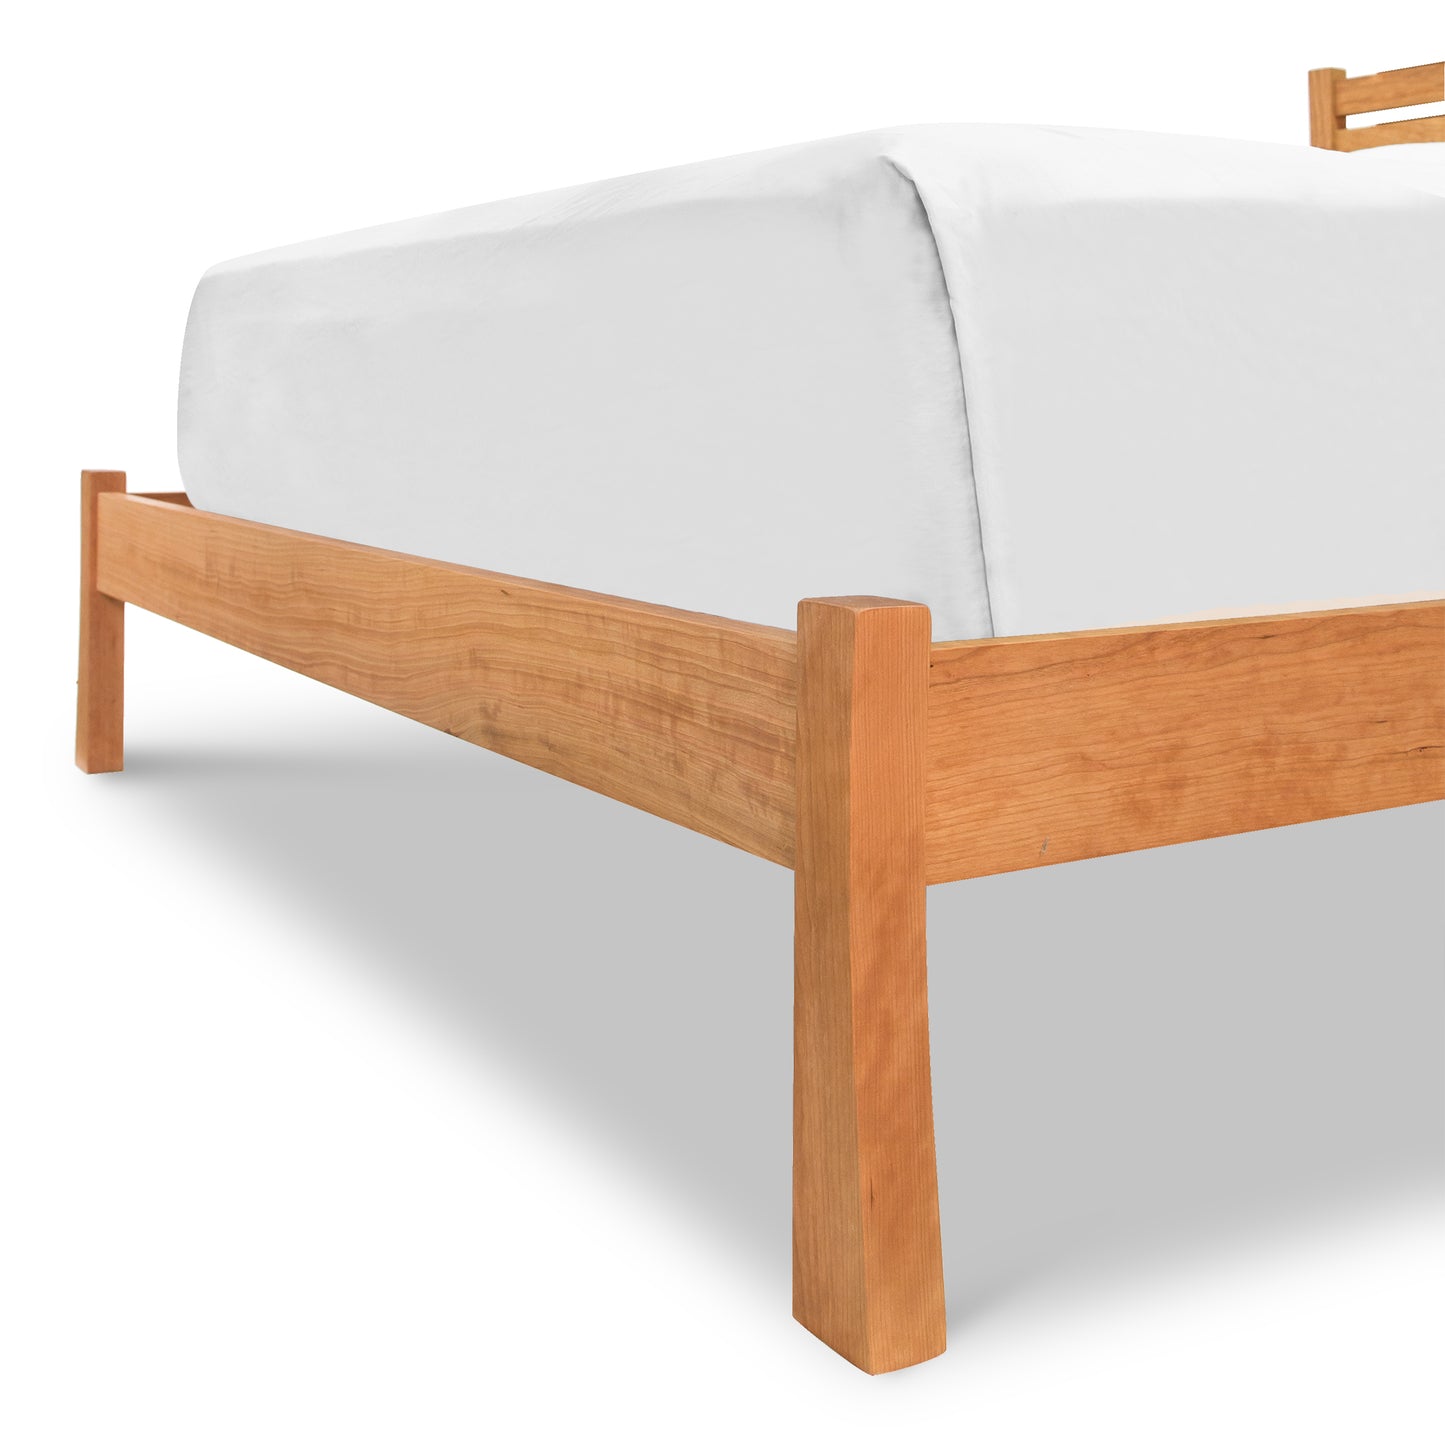 A Vermont Furniture Designs Horizon Platform Bed with a wooden frame and eco-friendly oil finish, featuring a white mattress on a white background.